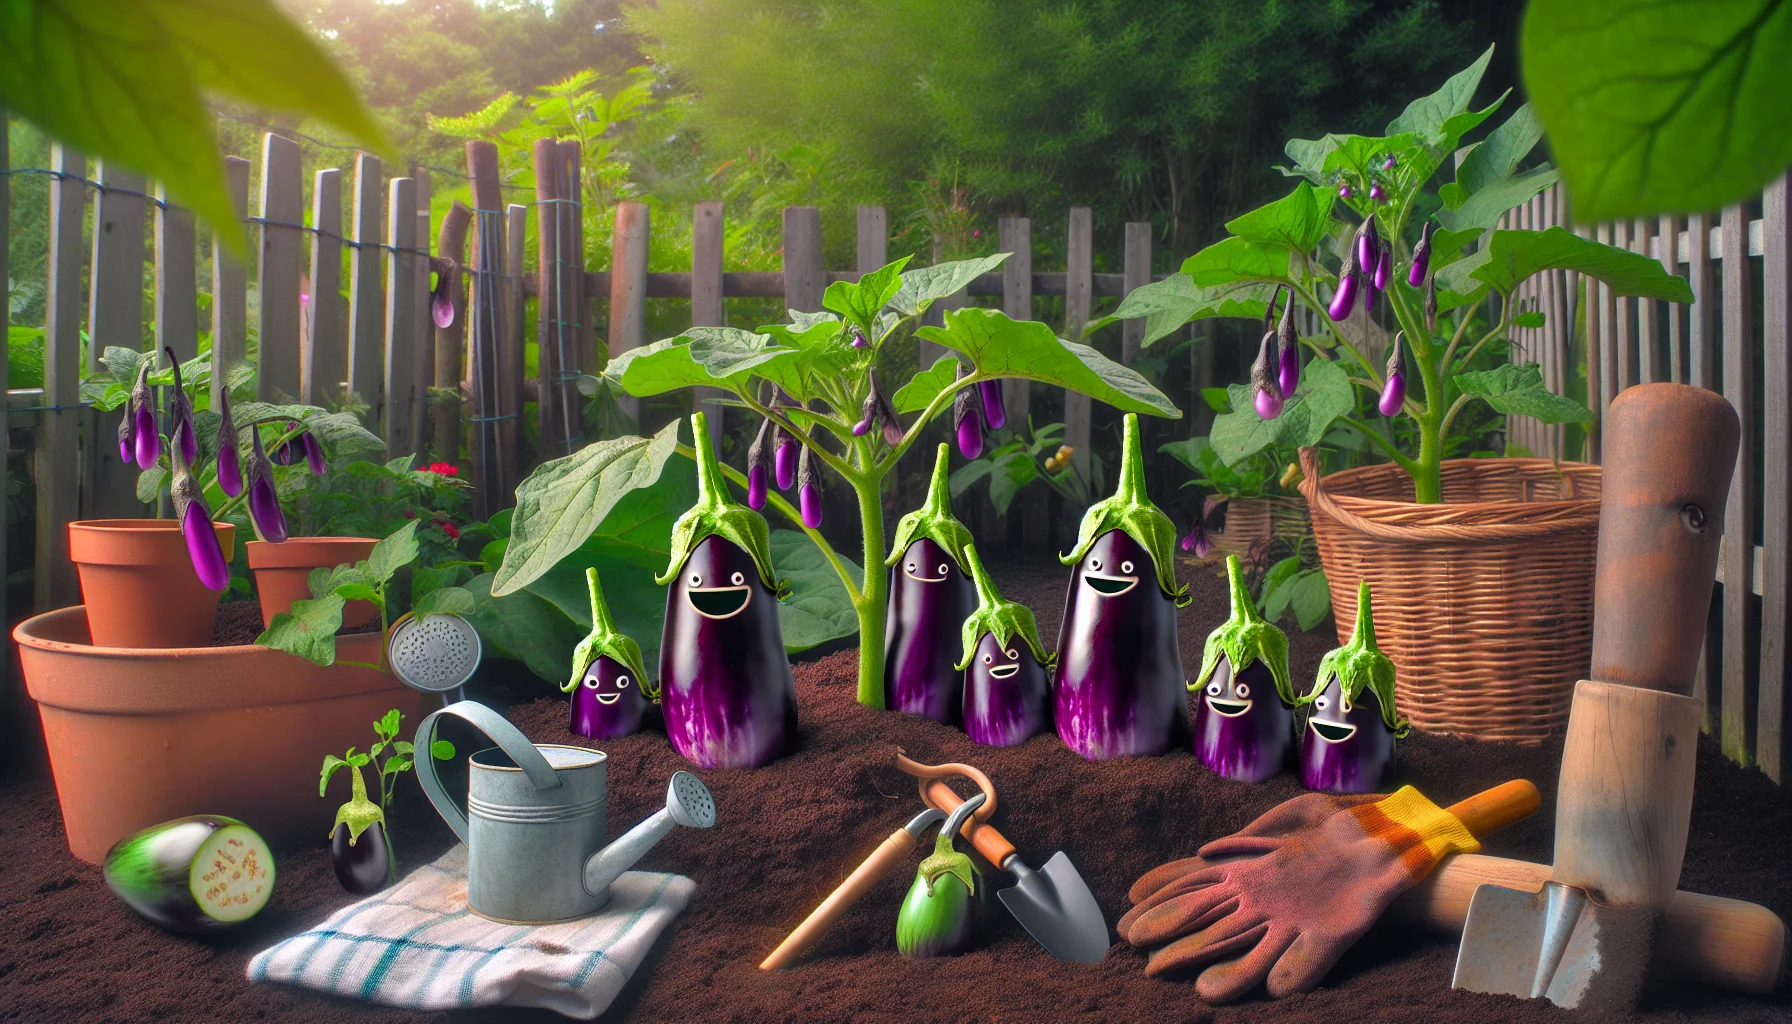 Create a humorous and captivating image featuring healthy Japanese eggplants growing in a welcoming garden. Perhaps they have taken on an unexpected shape or are participating in a playful scenario that invites viewers into the magic of gardening. The scene should be saturated with vibrant colors—lush green leaves, deep purple eggplants, rich brown soil—and filled with quaint gardening tools, like a rustic watering can and several gently worn gloves. It exudes such a joyous and somewhat idyllic aura that people cannot help but feel inspired to try their hand at gardening.